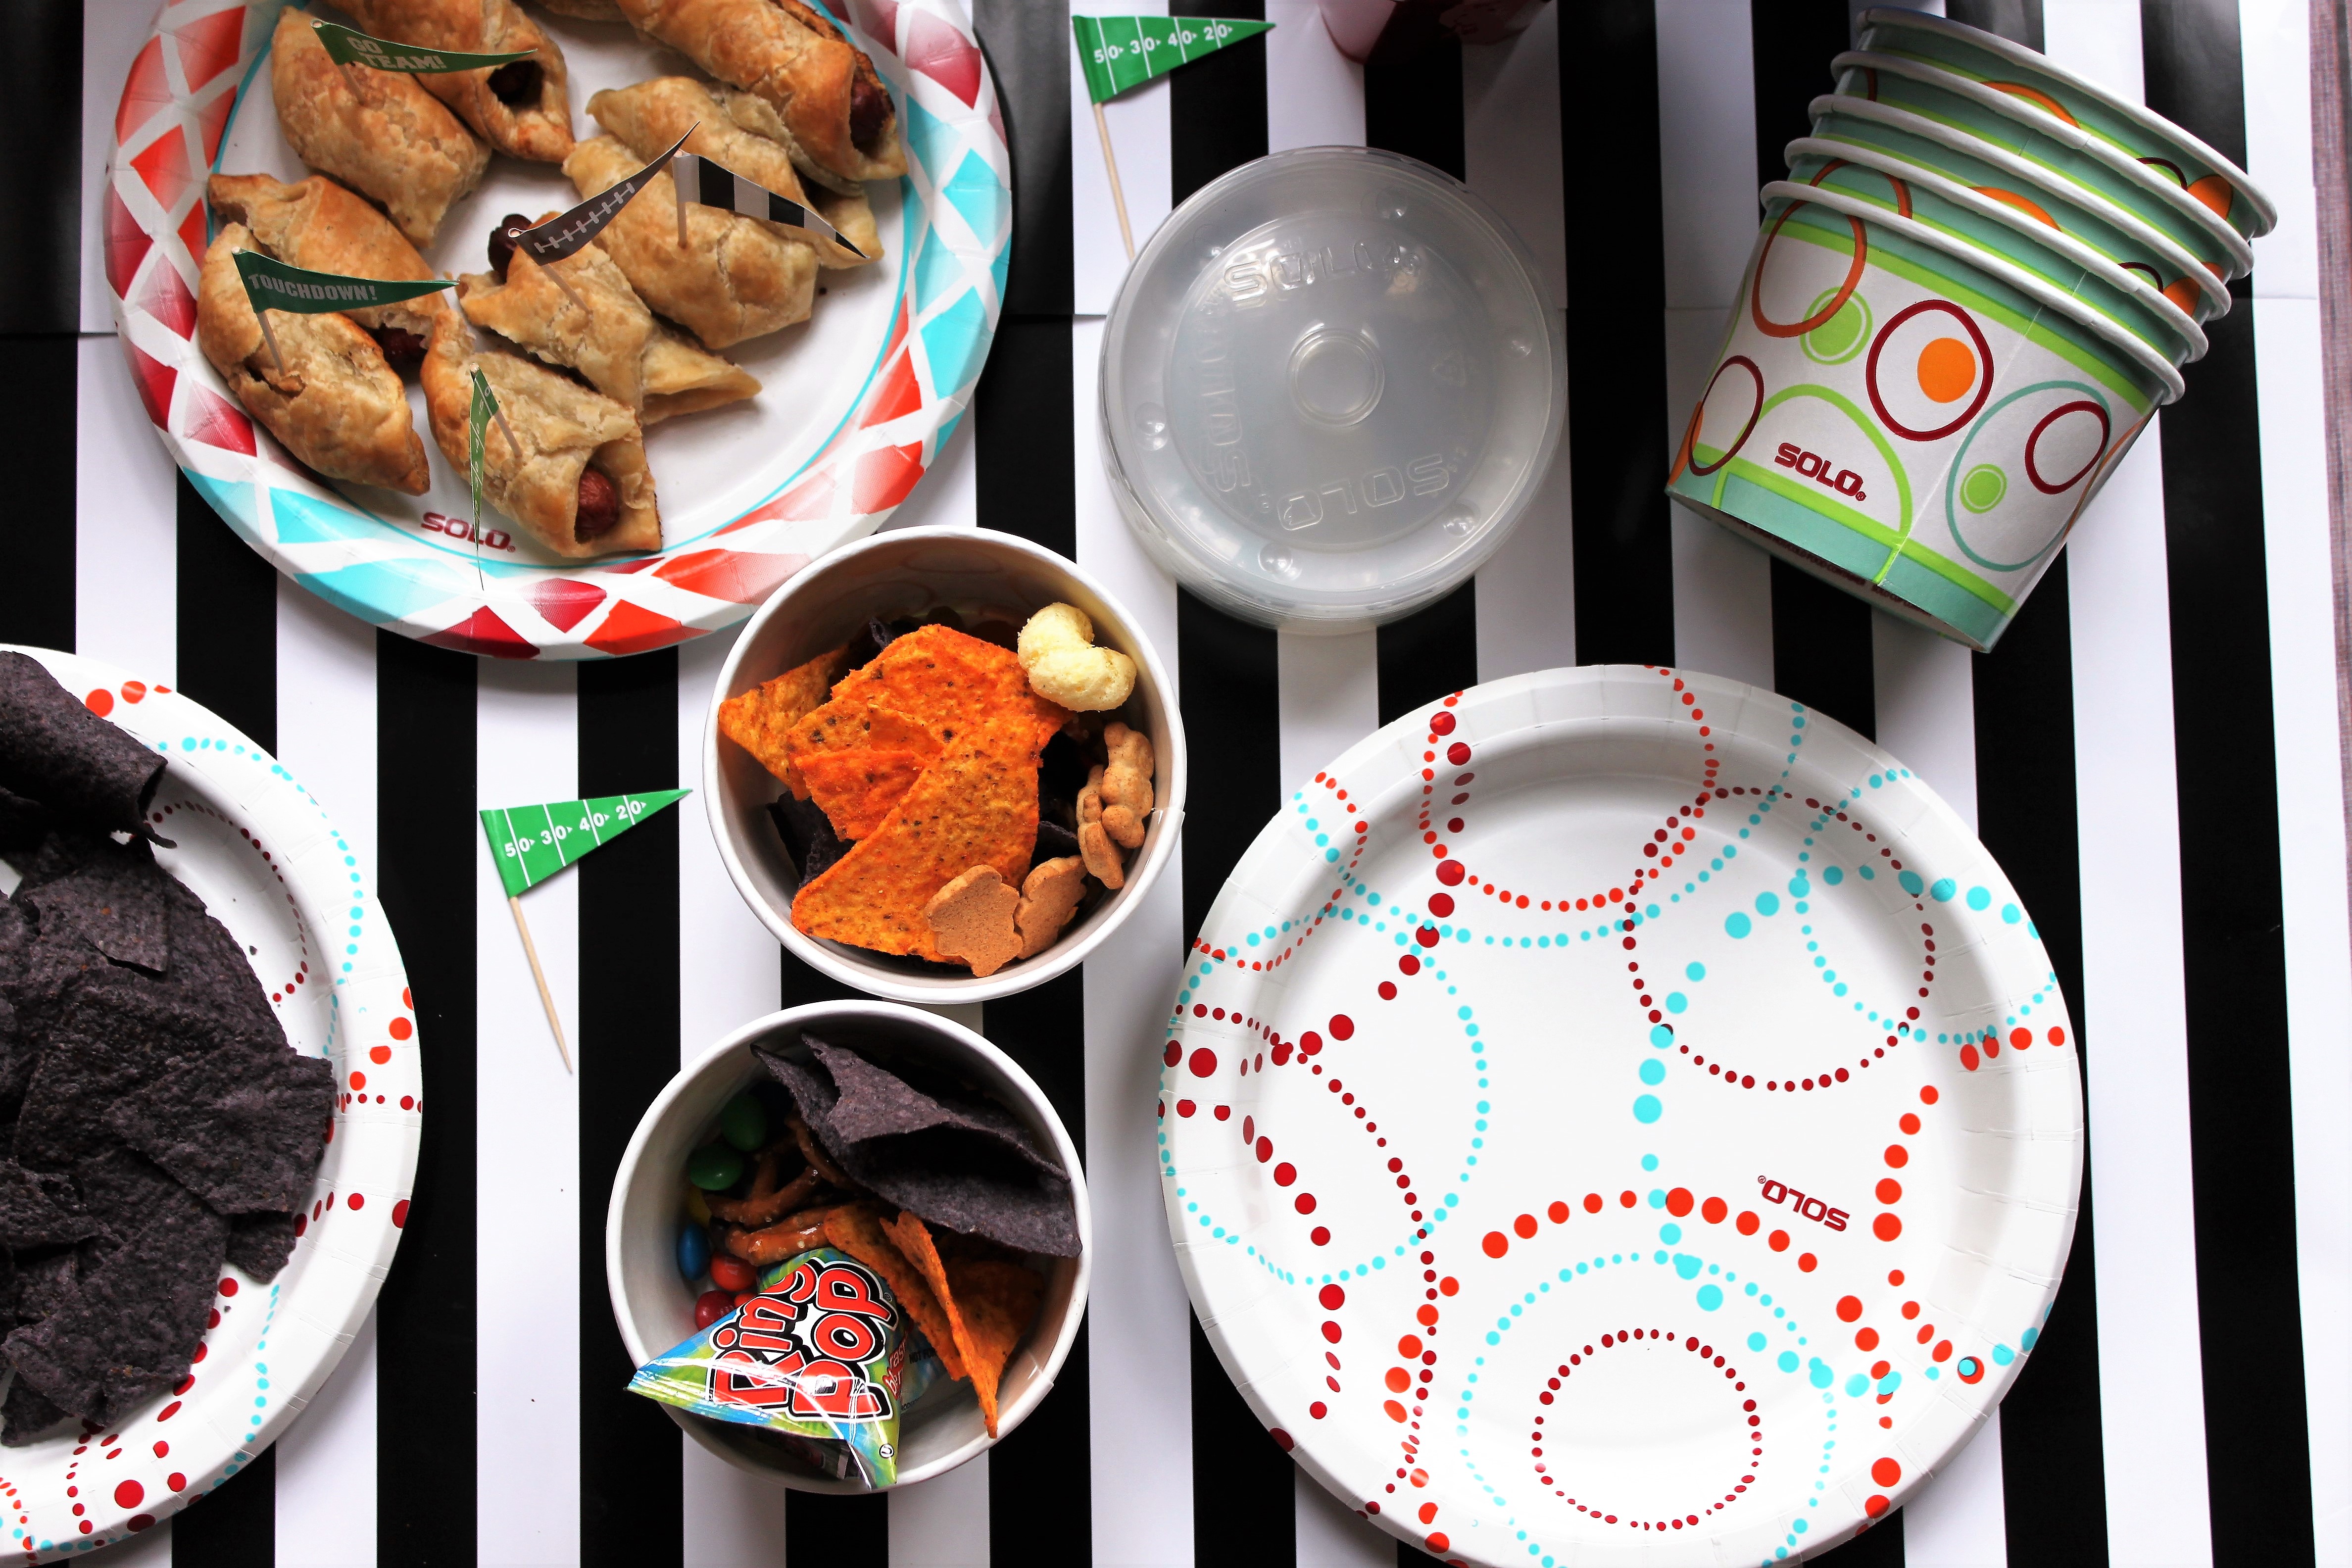 super bowl kid friendly ideas using solo products. Snacks and food